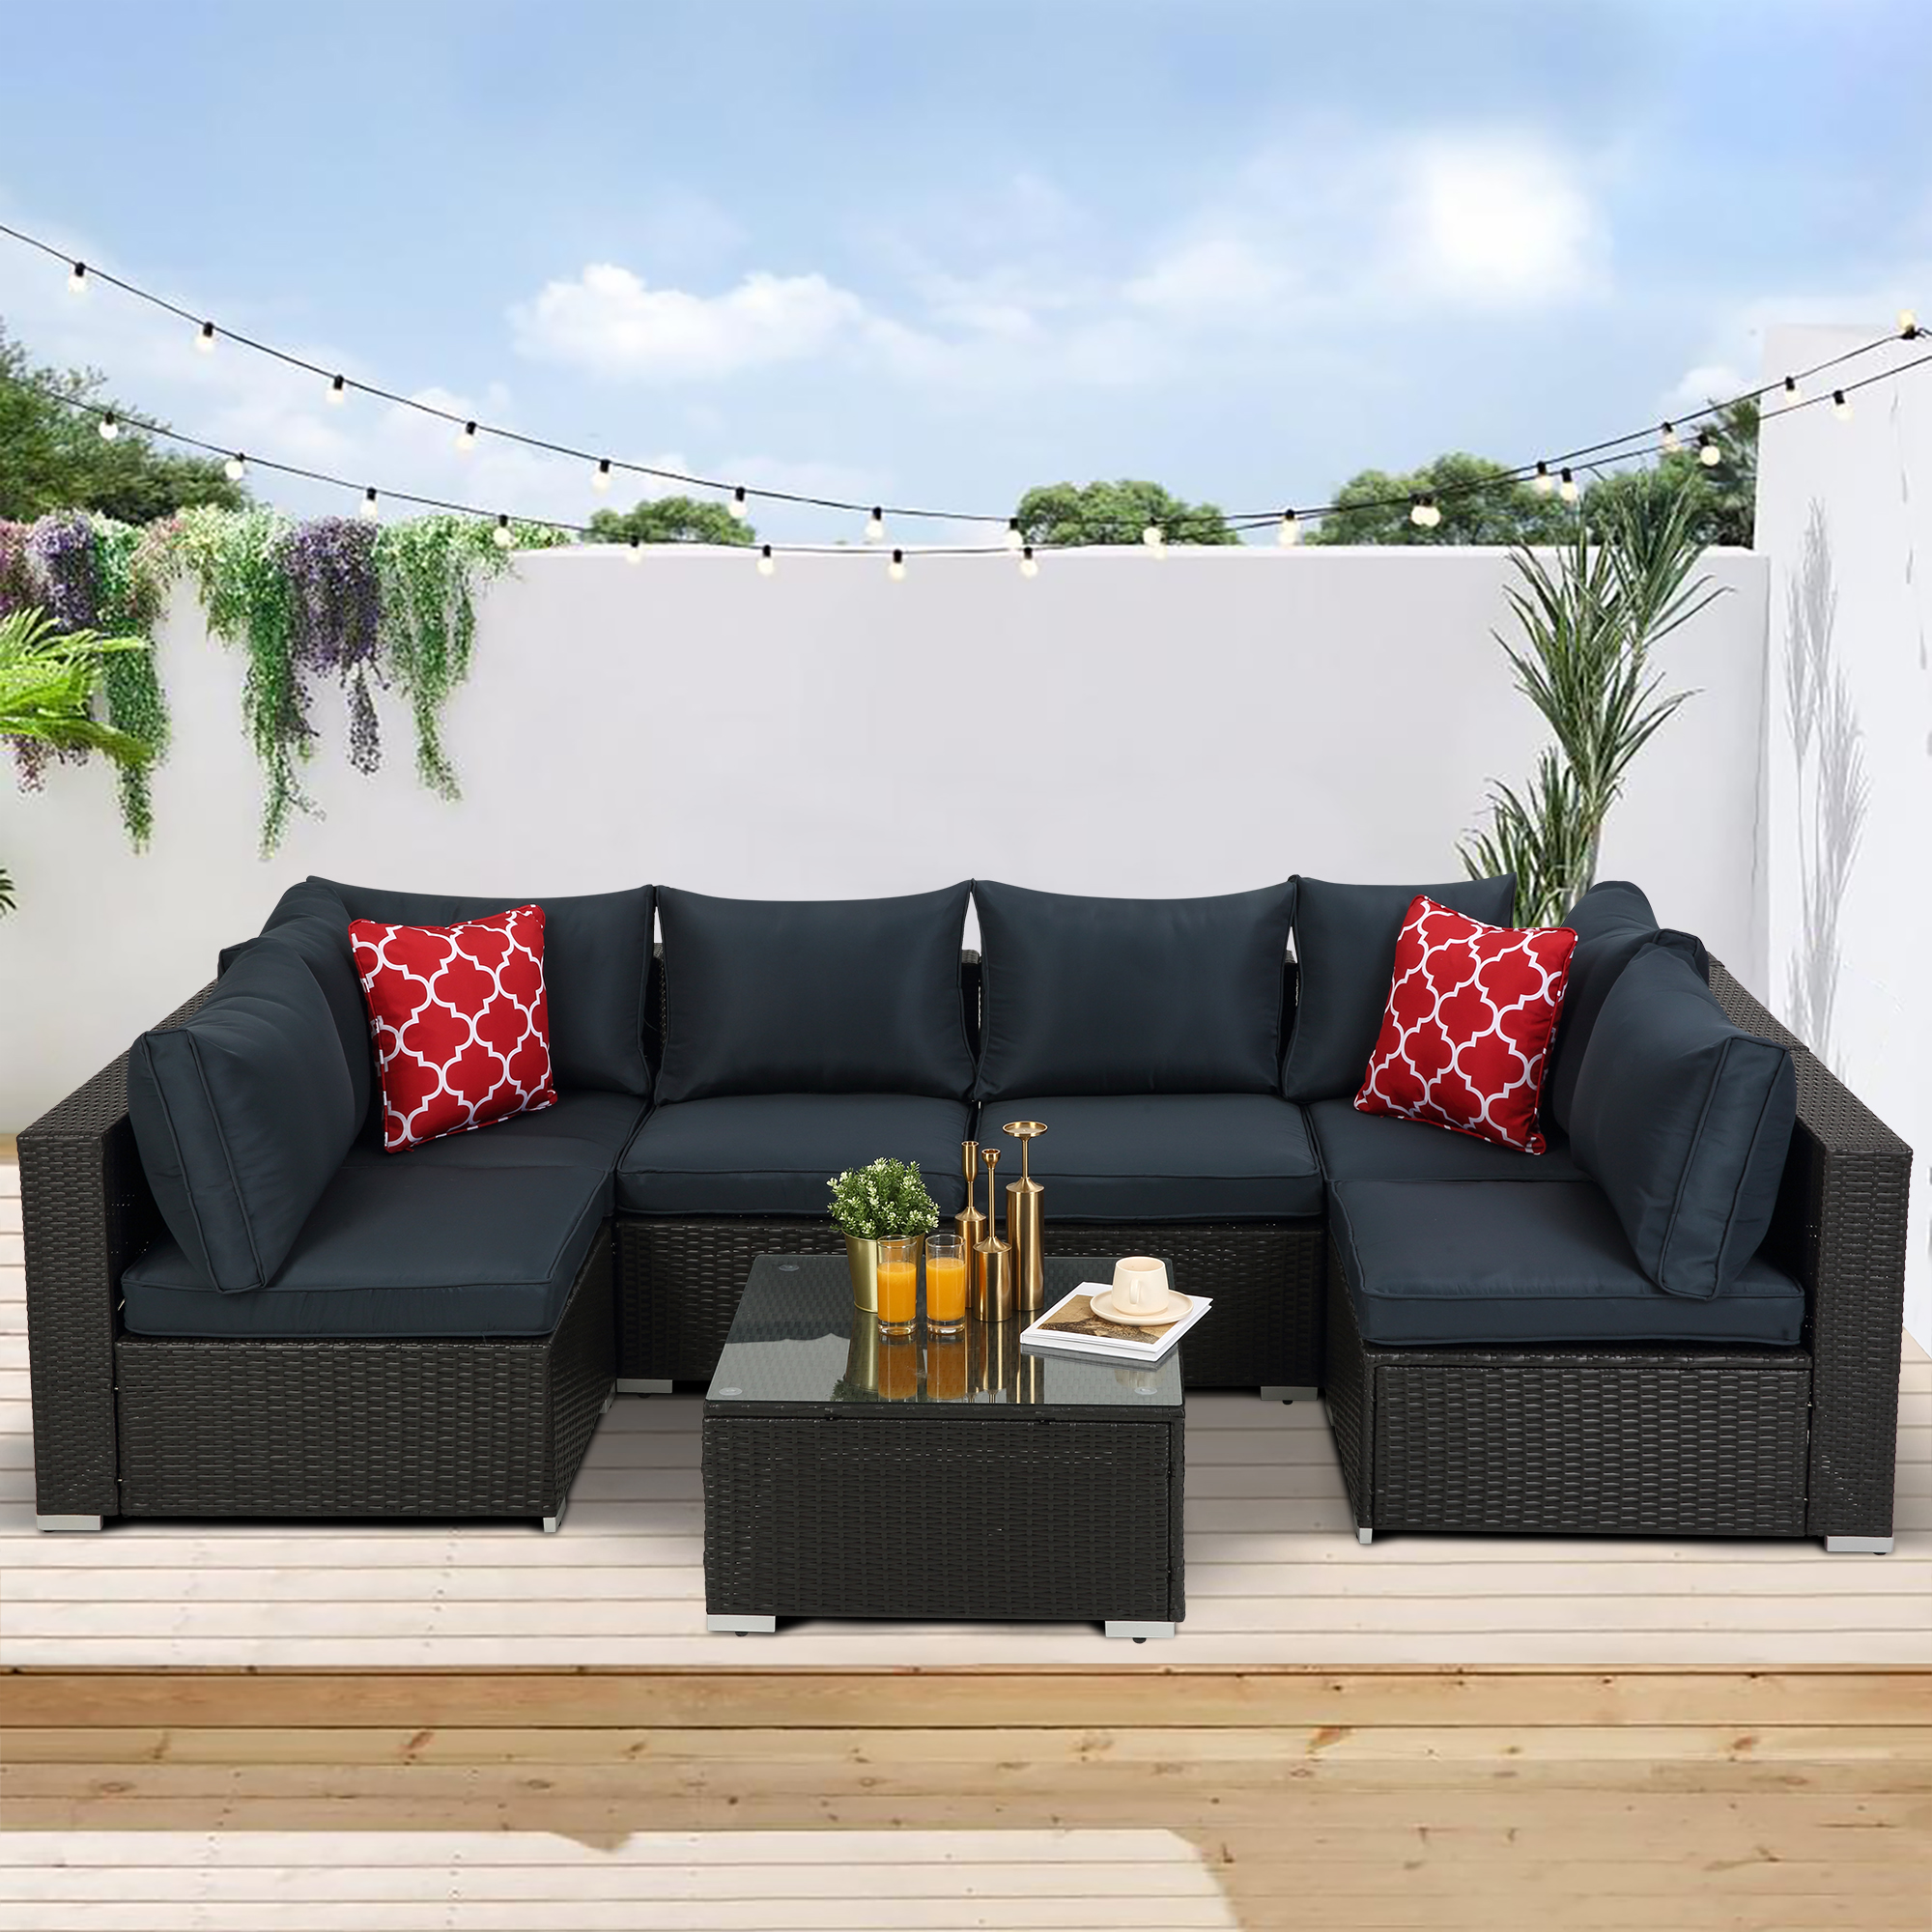 HIFINE-Outdoor Garden Patio Furniture 7-Piece PE Rattan Wicker Sectional Cushioned Sofa Sets with 2 Pillows and Coffee Table-Boyel Living